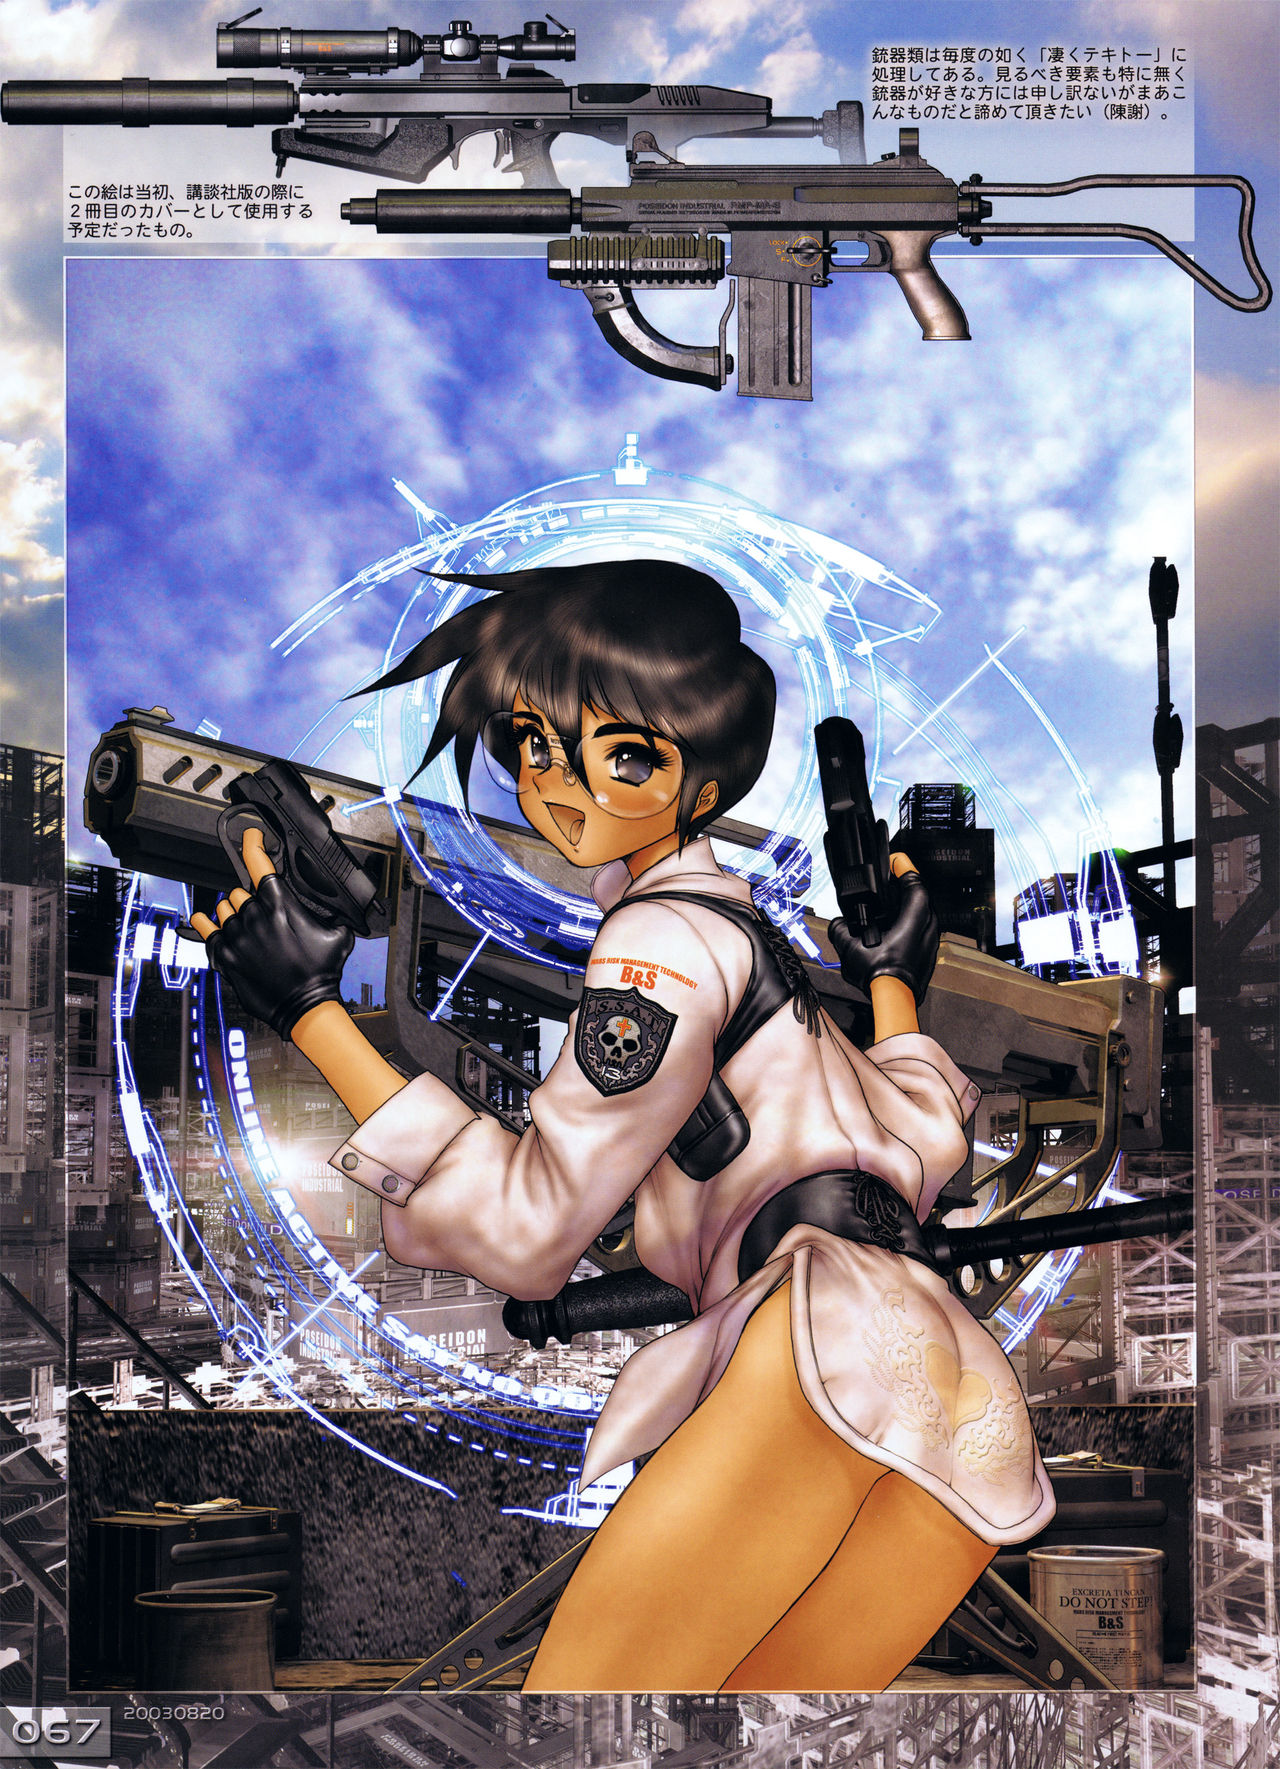 [Masamune Shirow] W Tails Cat 2 [士郎正宗] W・TAILS CAT 2